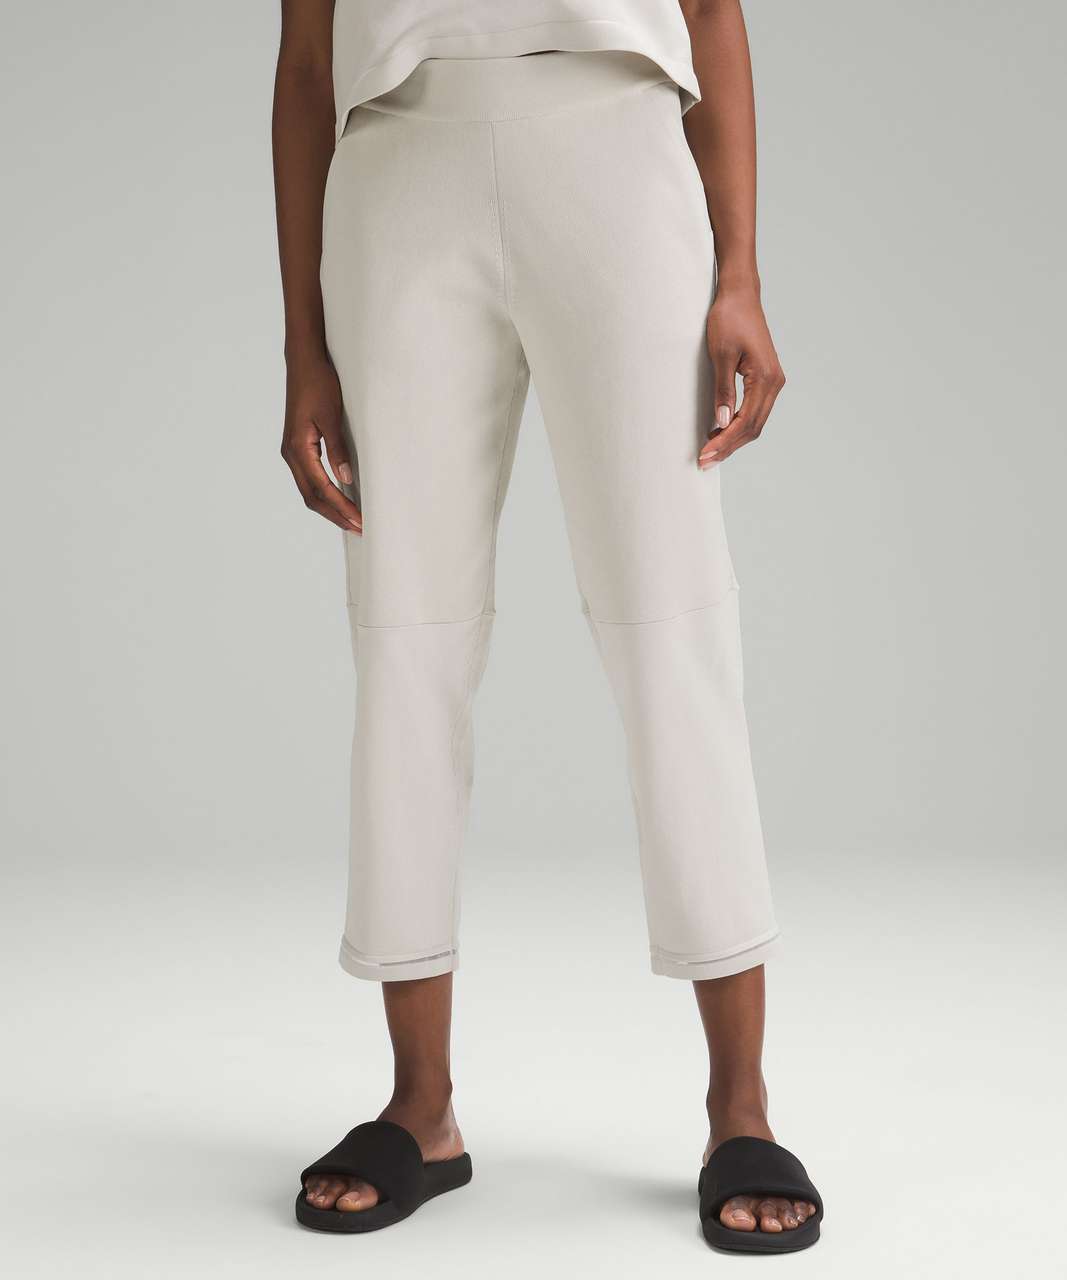 Lululemon Relaxed-Fit High-Rise Knit Cropped Pants 24